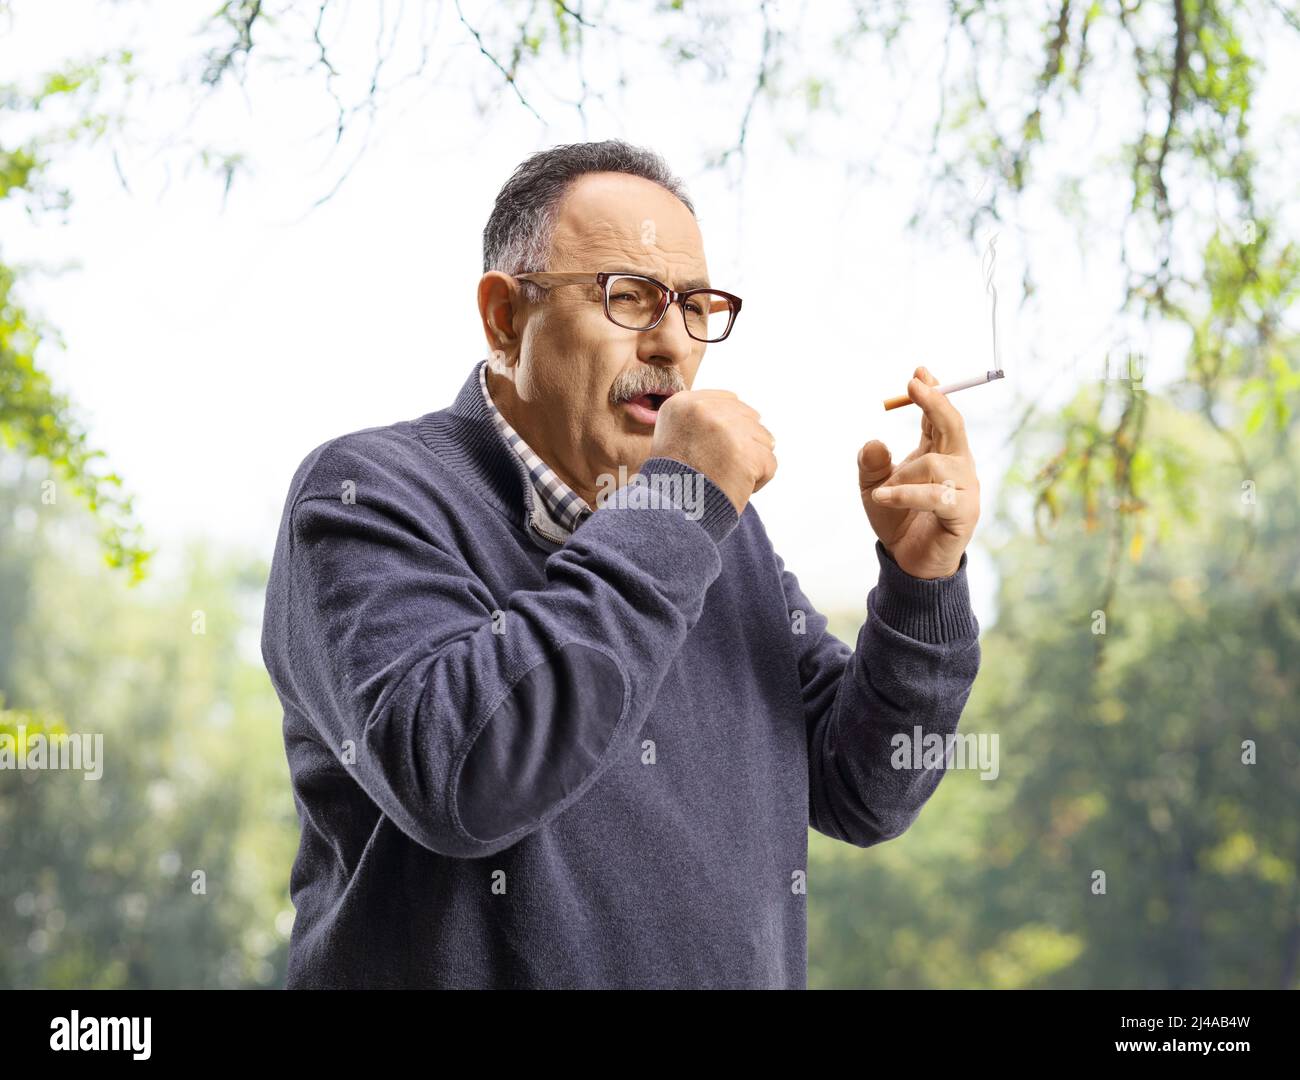 Mature man smoking and coughing outdoors in a park Stock Photo